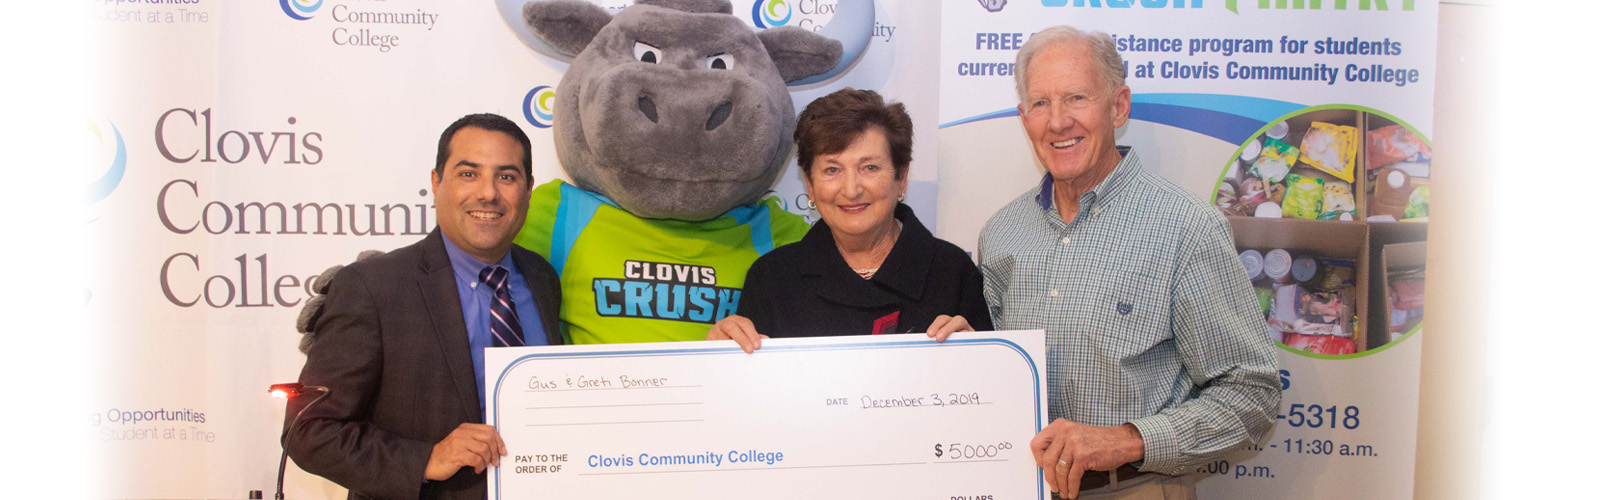 Gus and Greti Bonner presenting their check for five thousand dollars